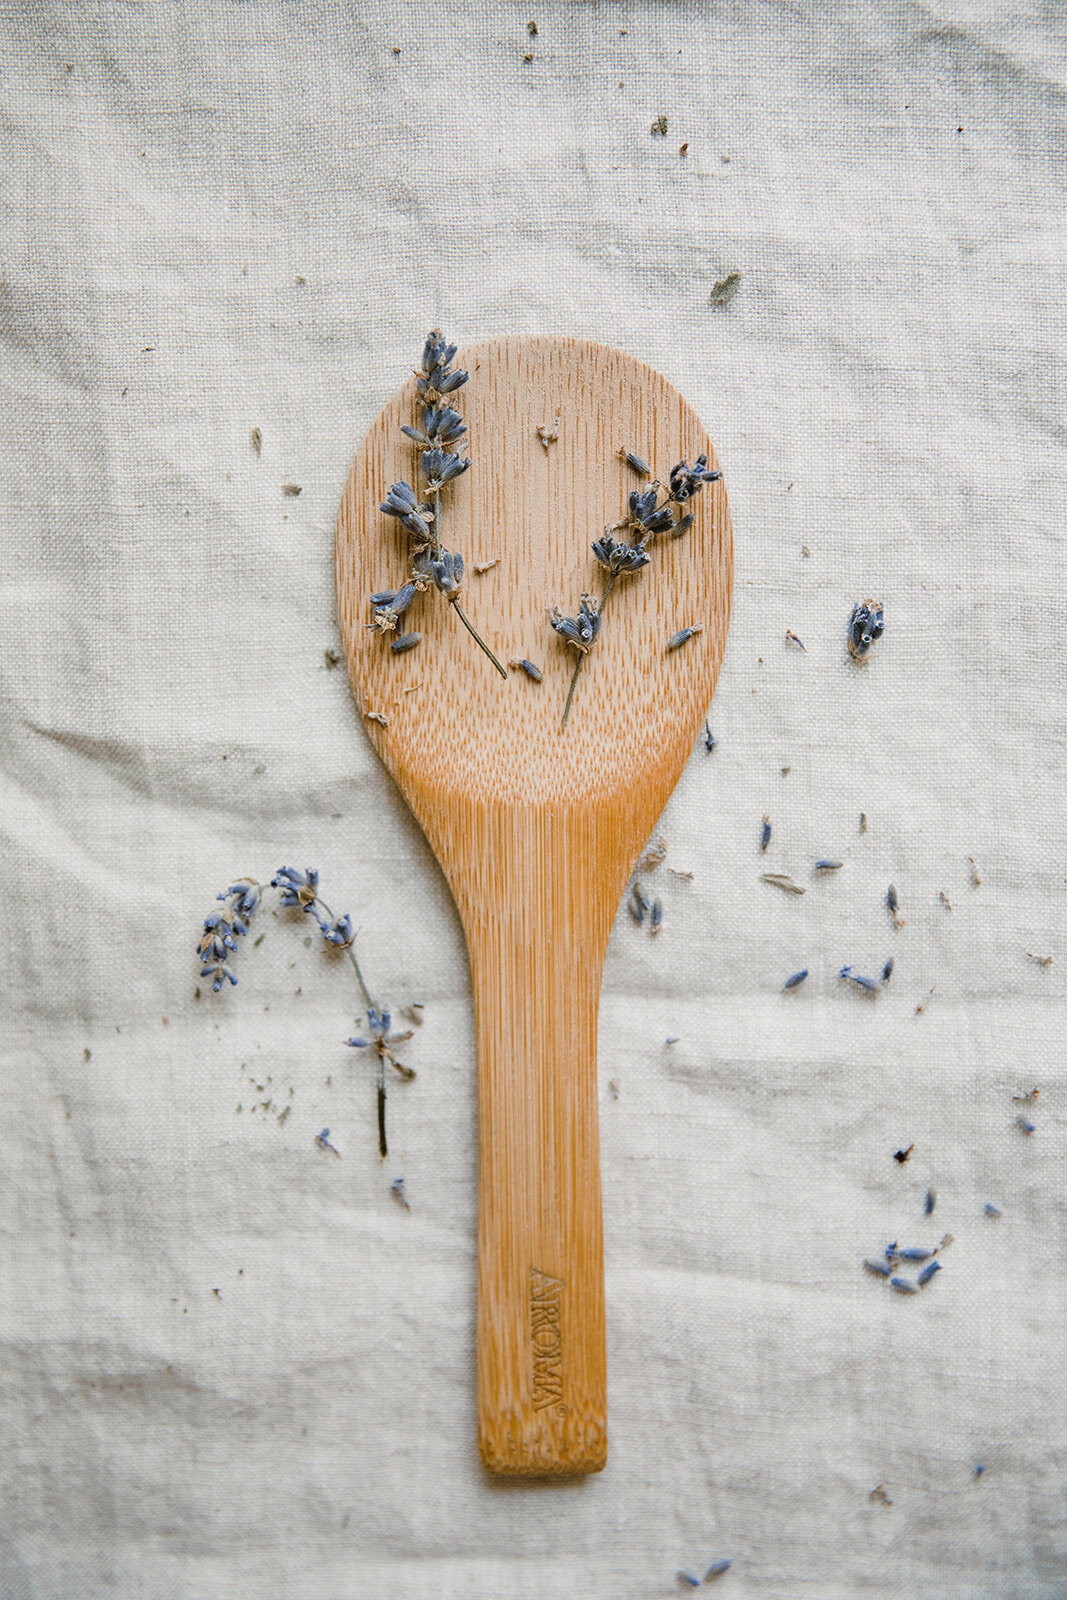  Lavender on wooden spoon | Be Mindful Skincare | Sarah Mattozzi Photography 